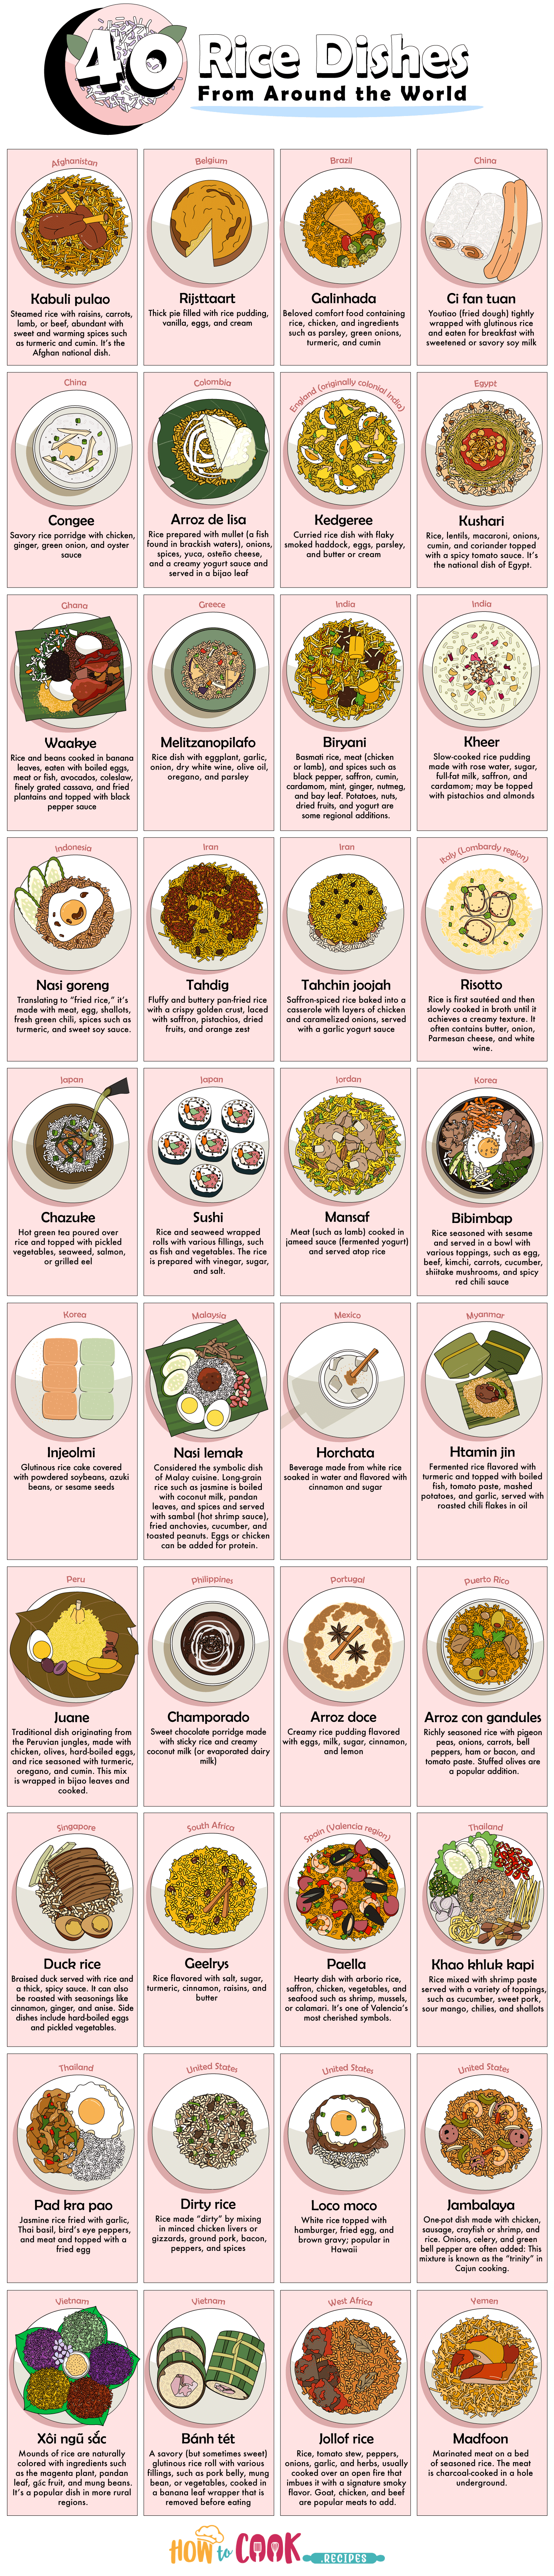 40 Rice Dishes from Around the World